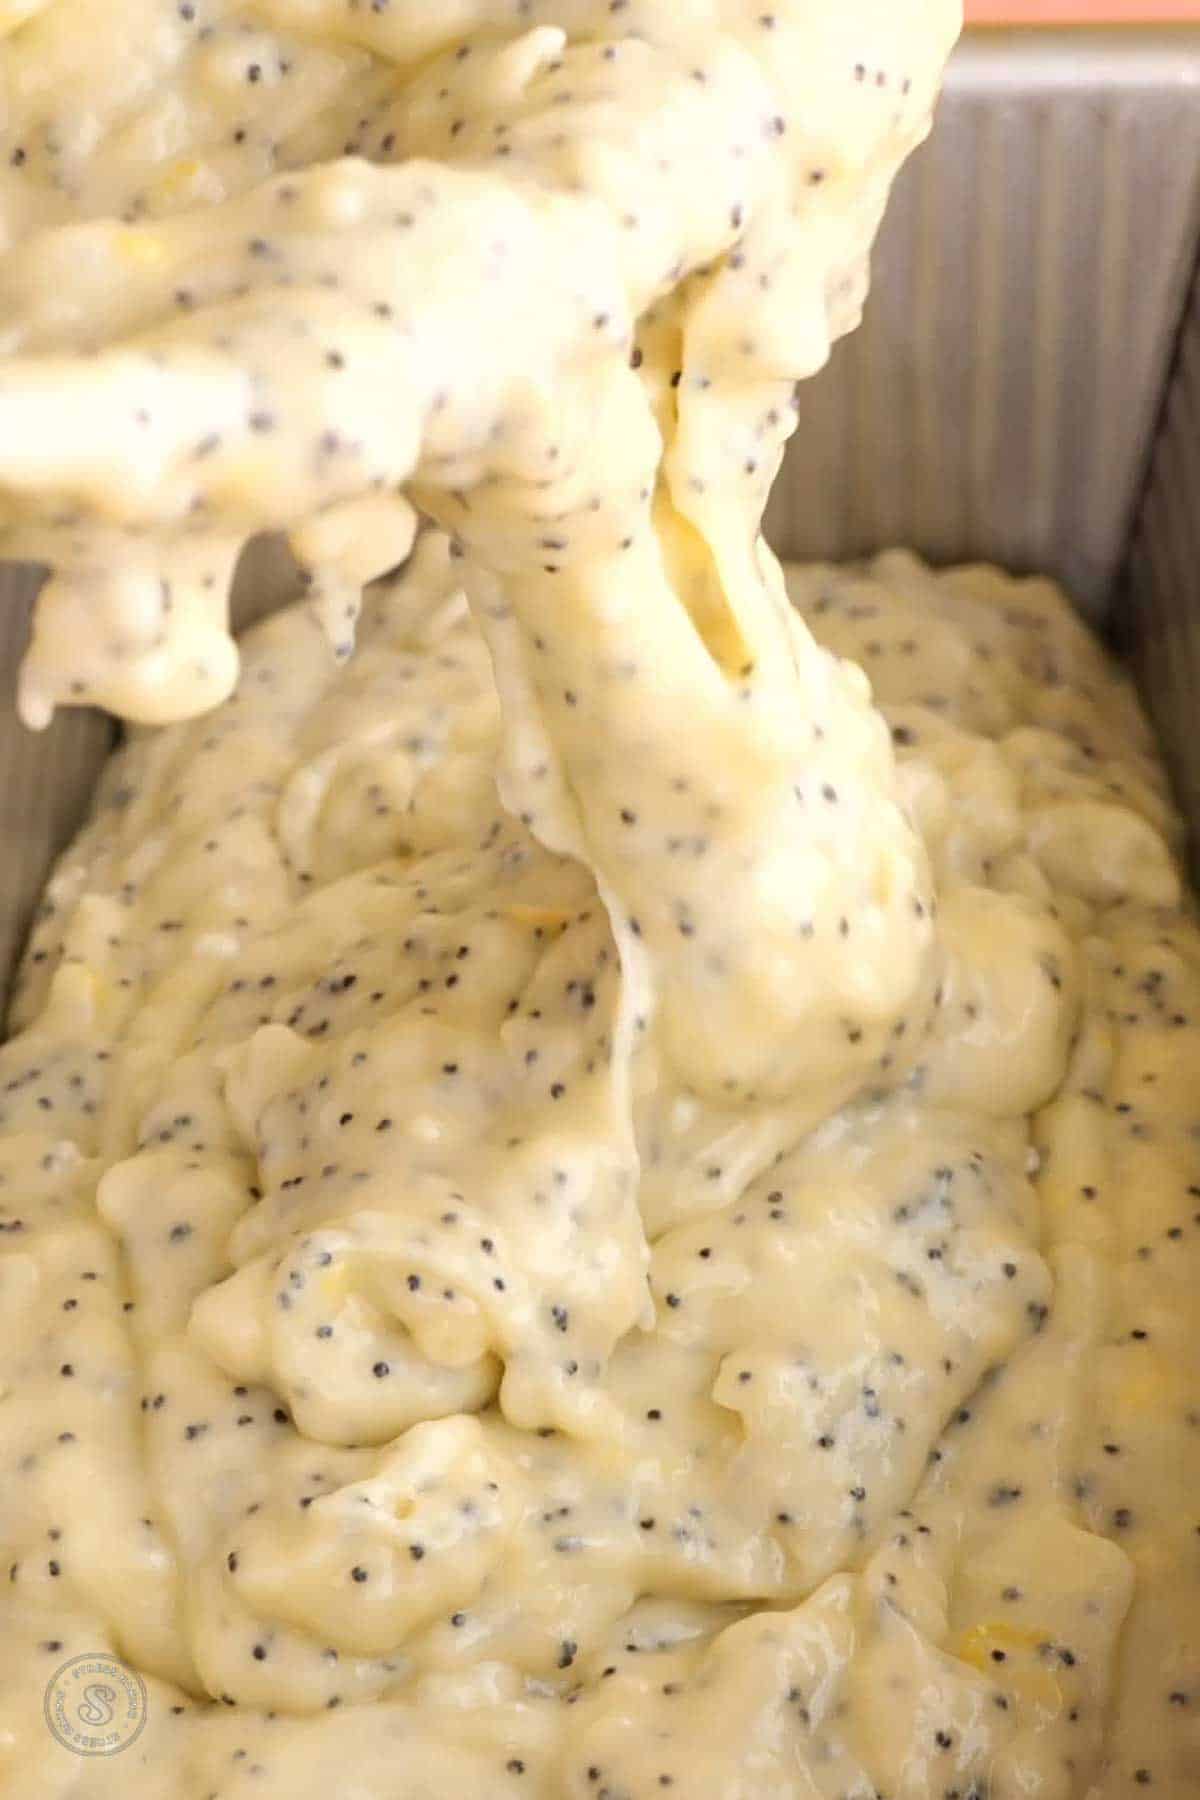 Lemon poppy seed batter being poured into a loaf pan